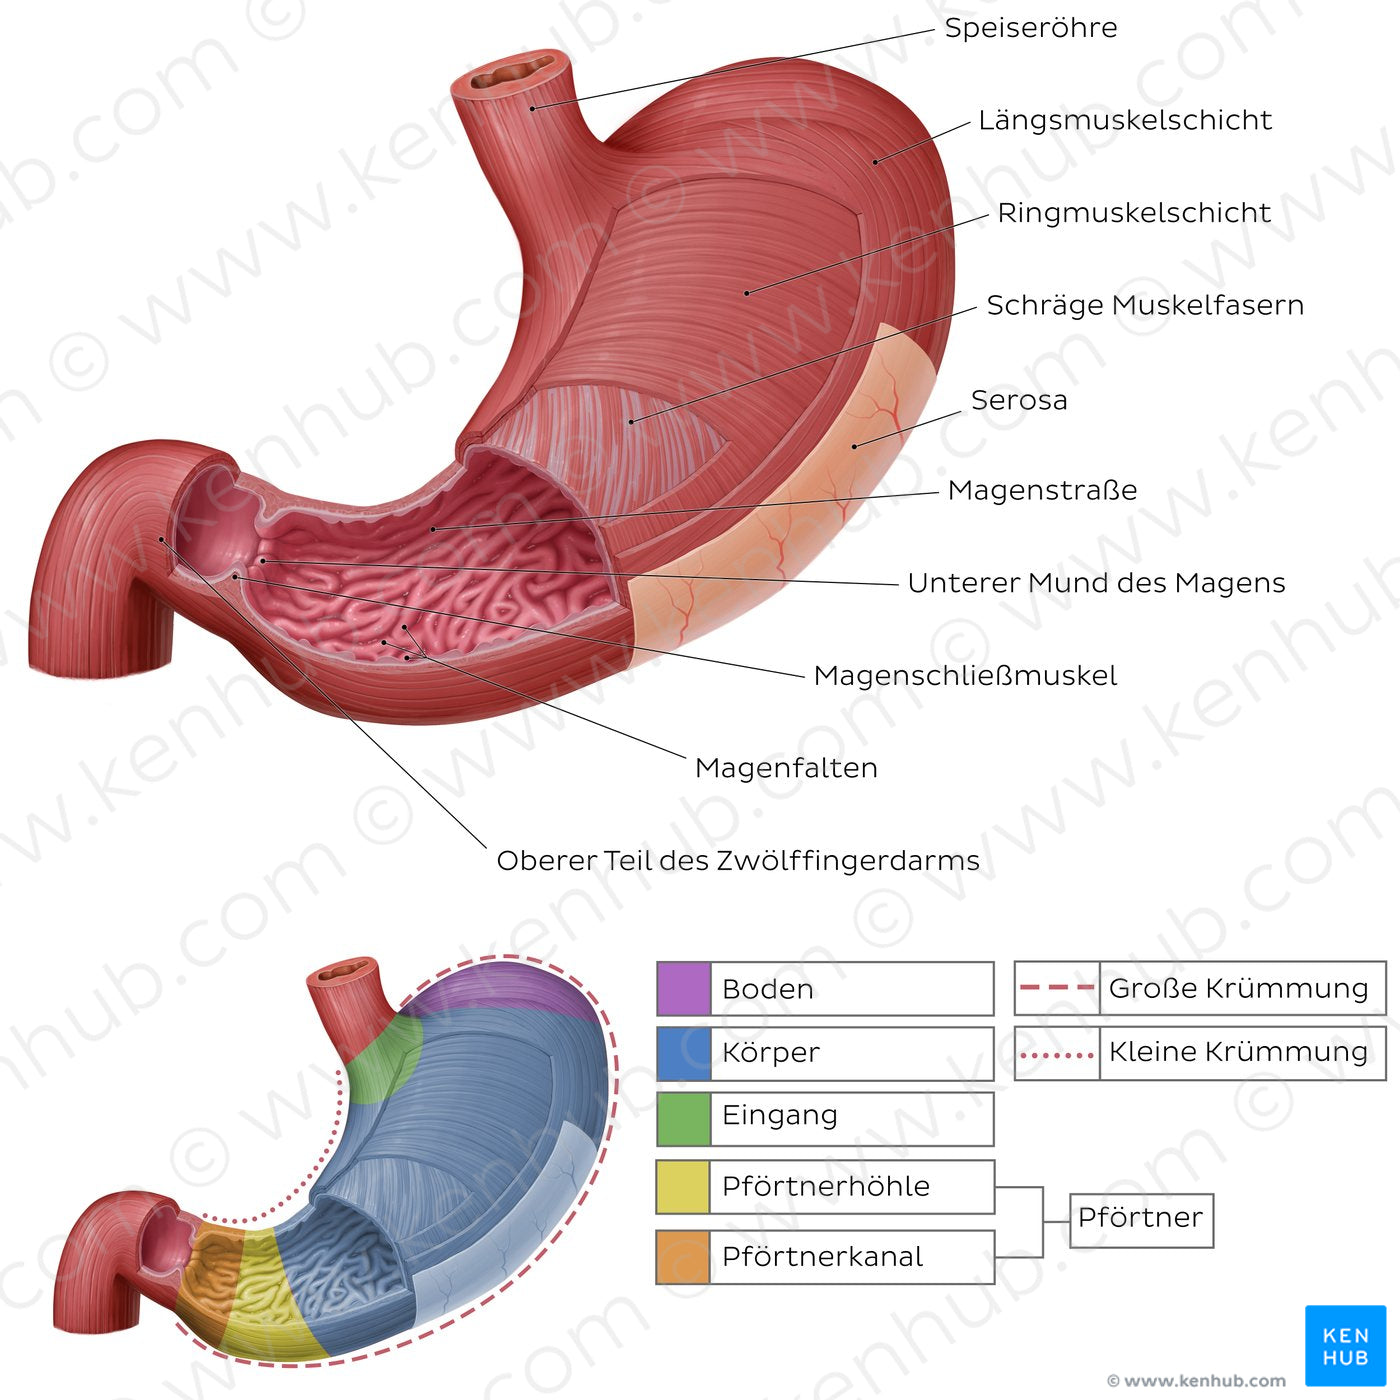 Musculature and mucosa of the stomach (German)